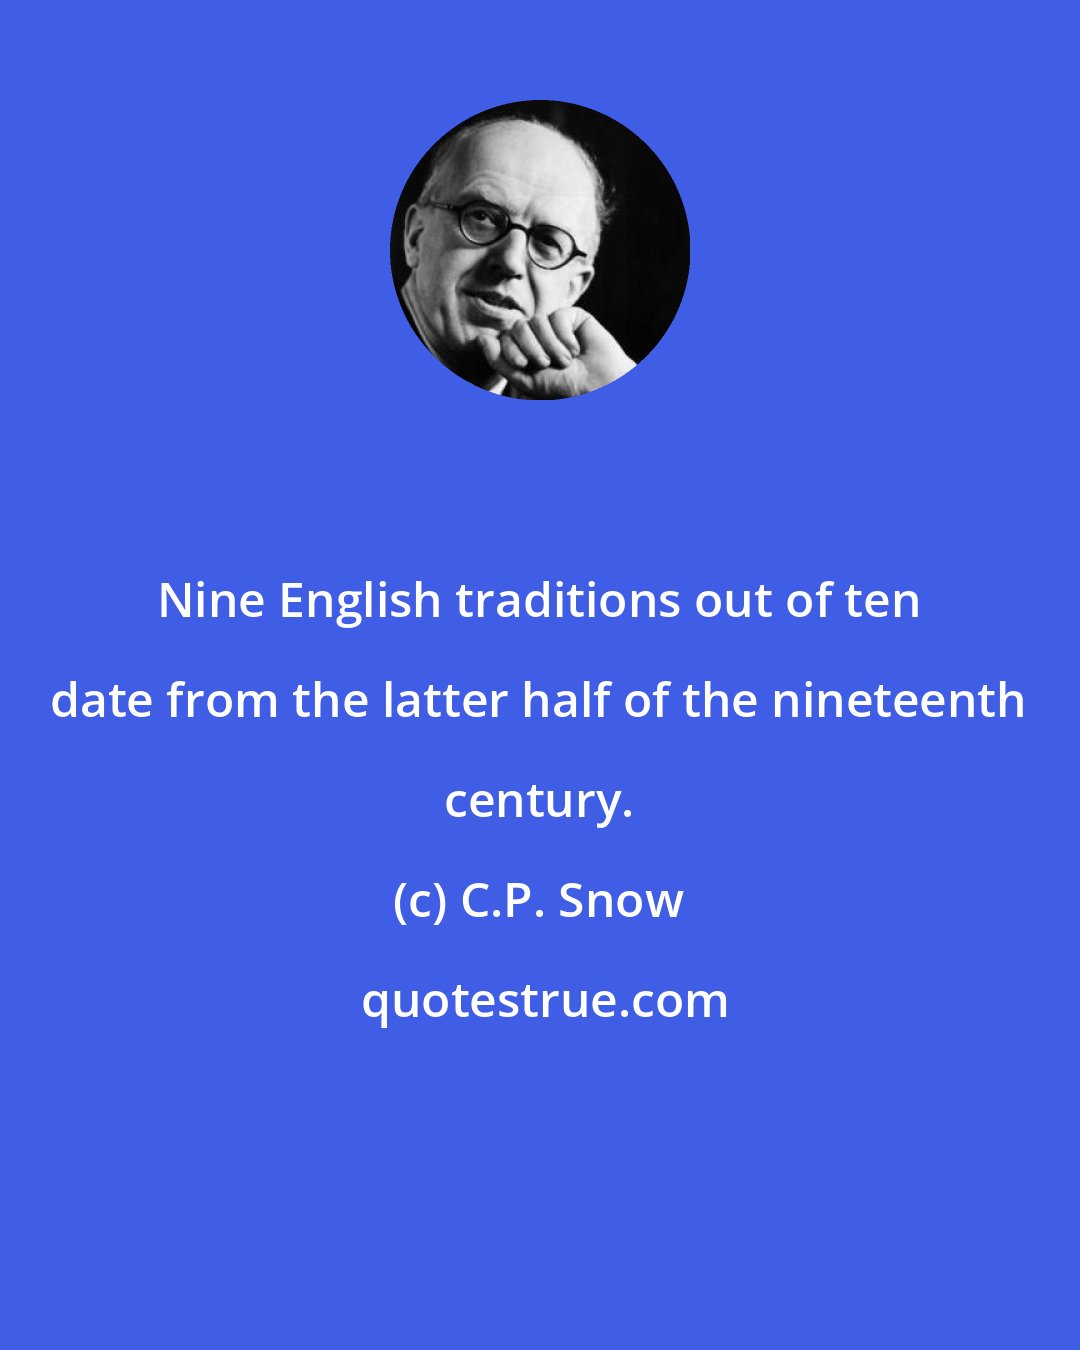 C.P. Snow: Nine English traditions out of ten date from the latter half of the nineteenth century.